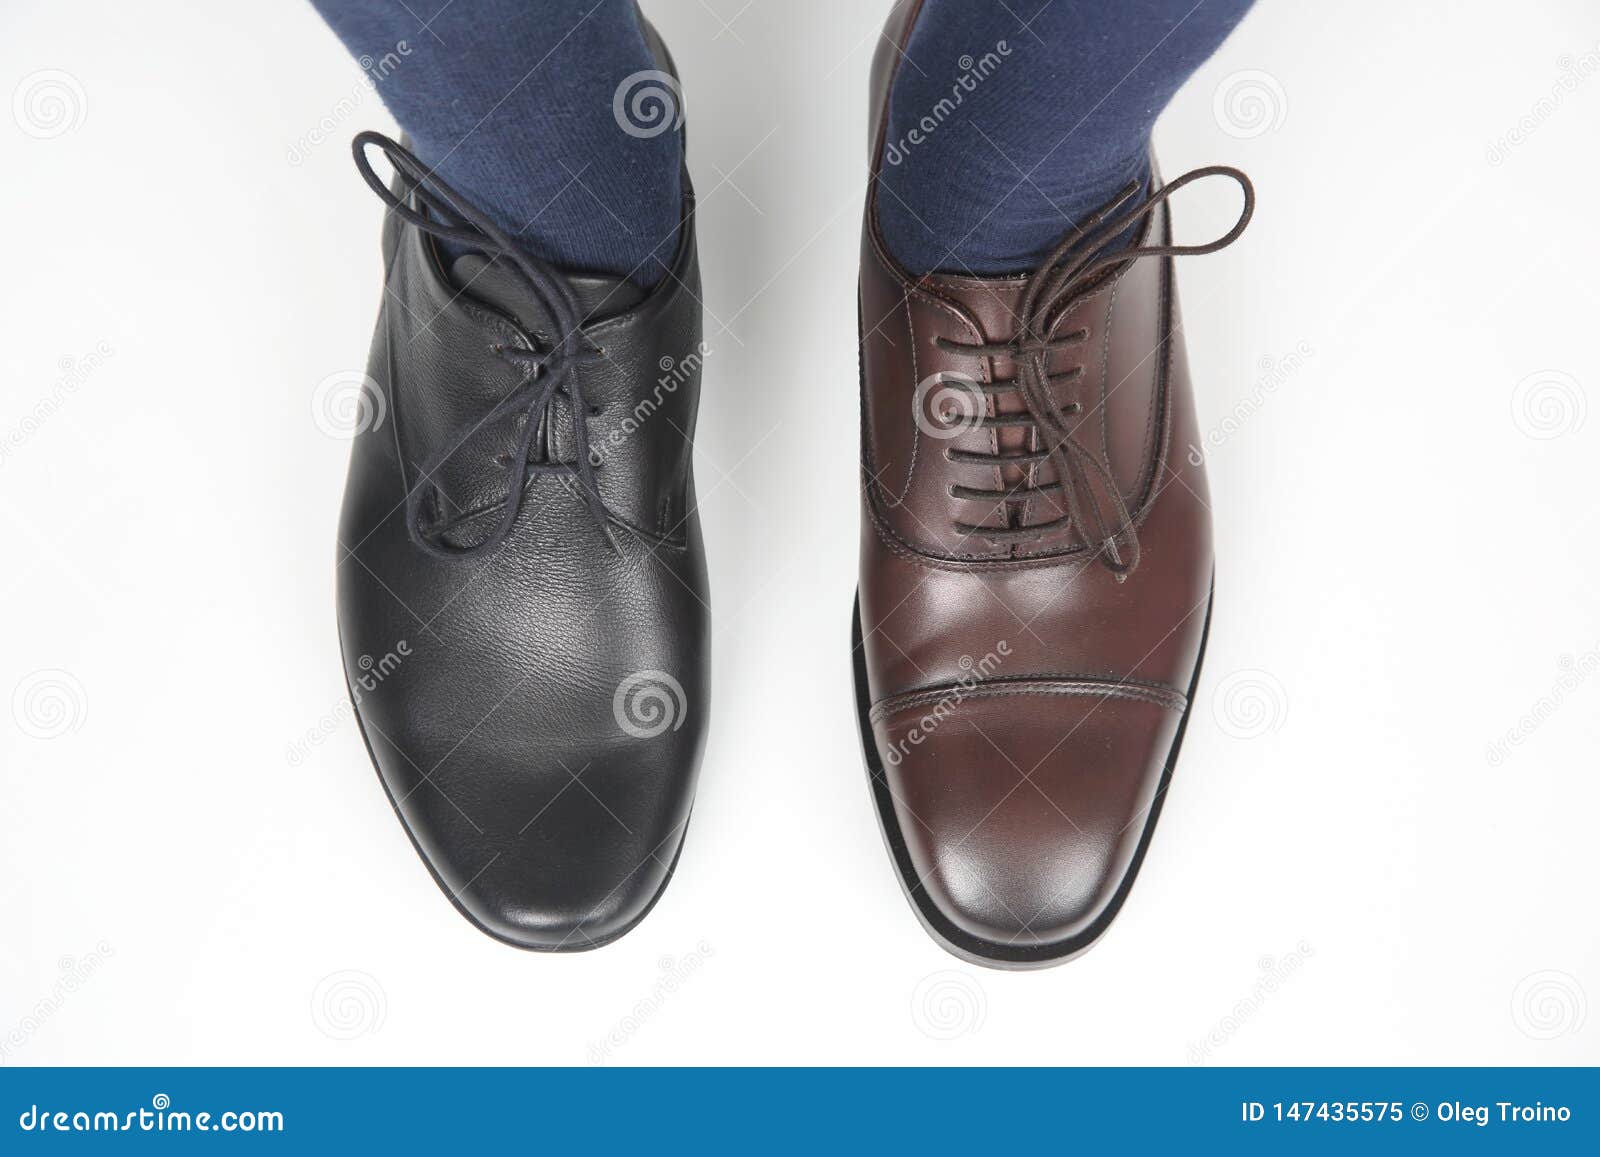 Man`s Feet in Classic Brown and Black Shoes Stock Image - Image of ...